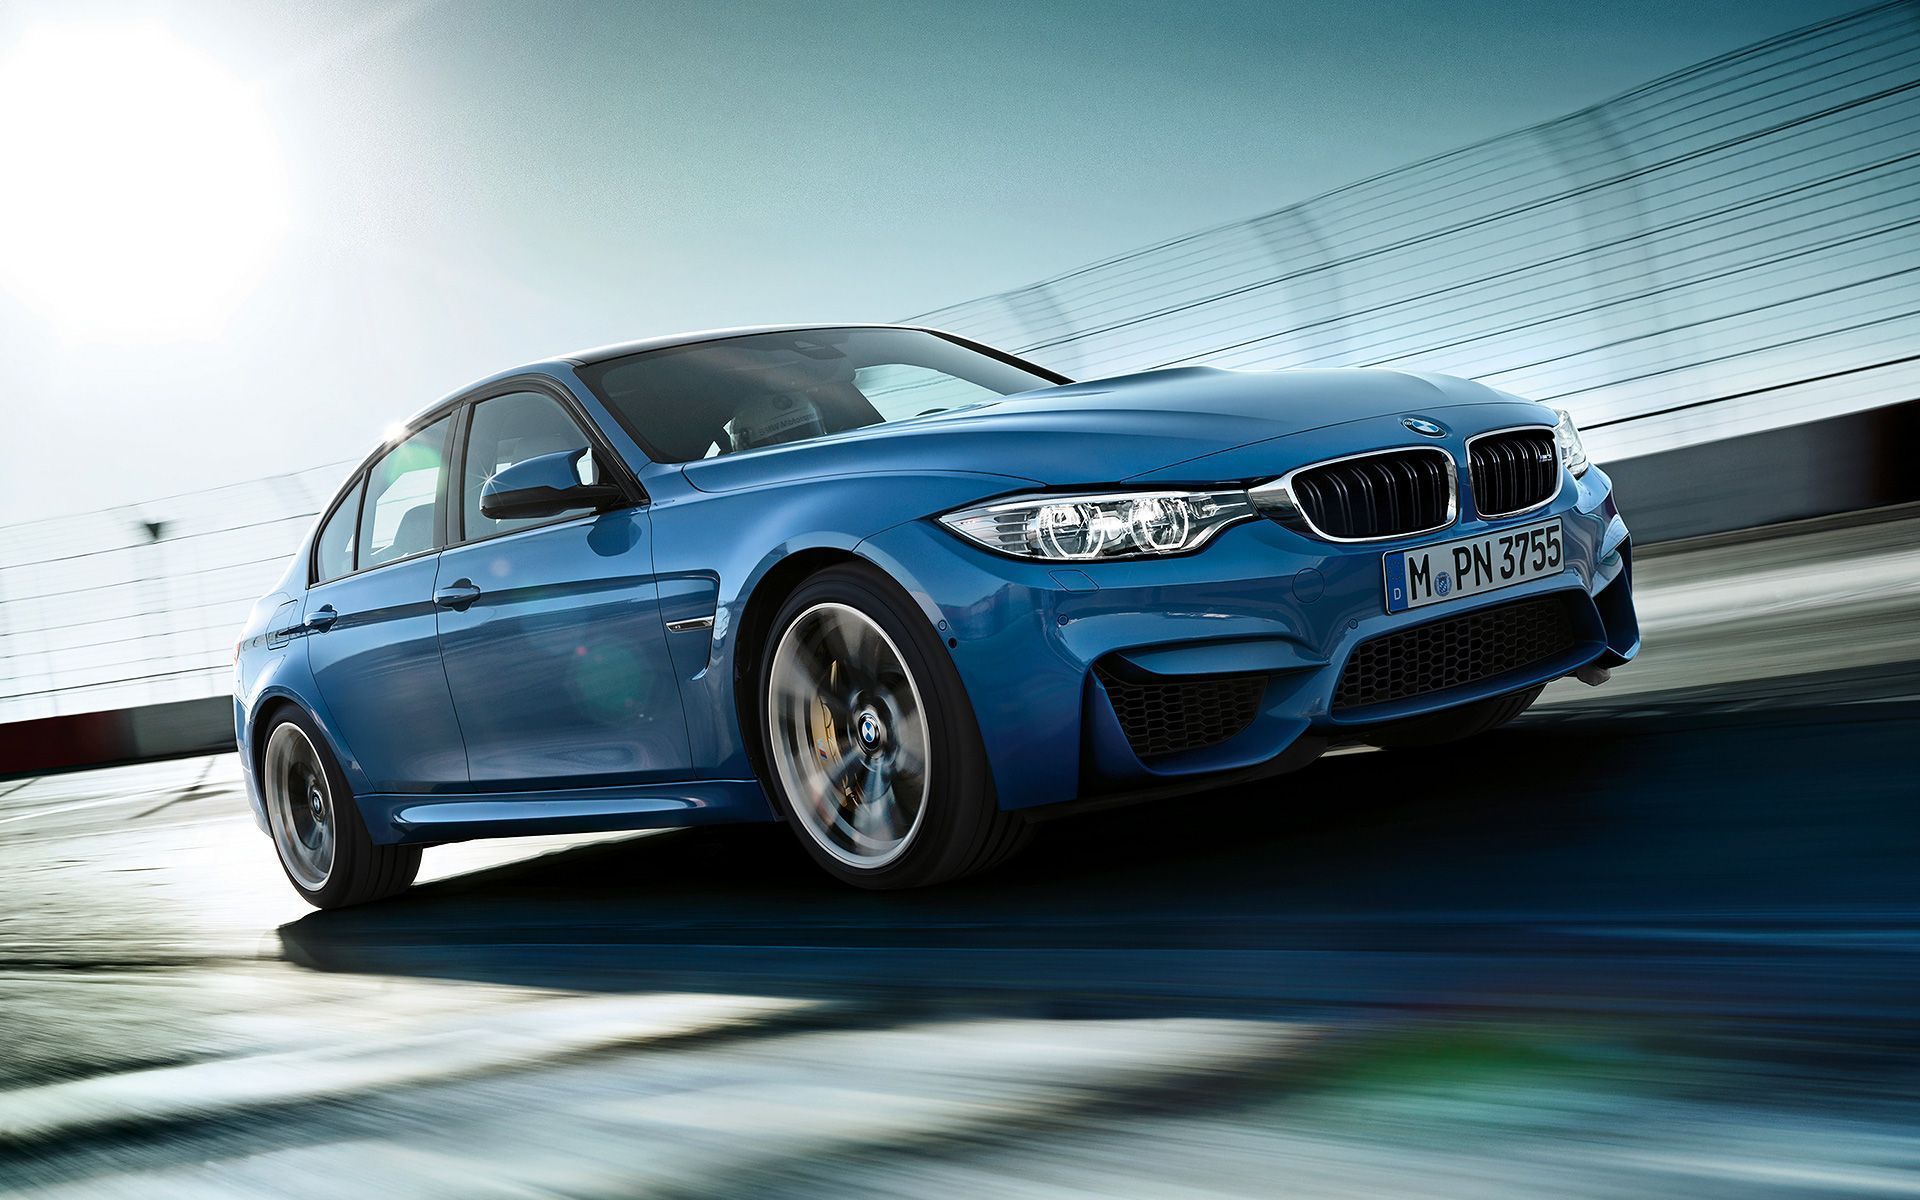 BMW M4 and BMW M3 Wallpapers - DOWNLOAD NOW